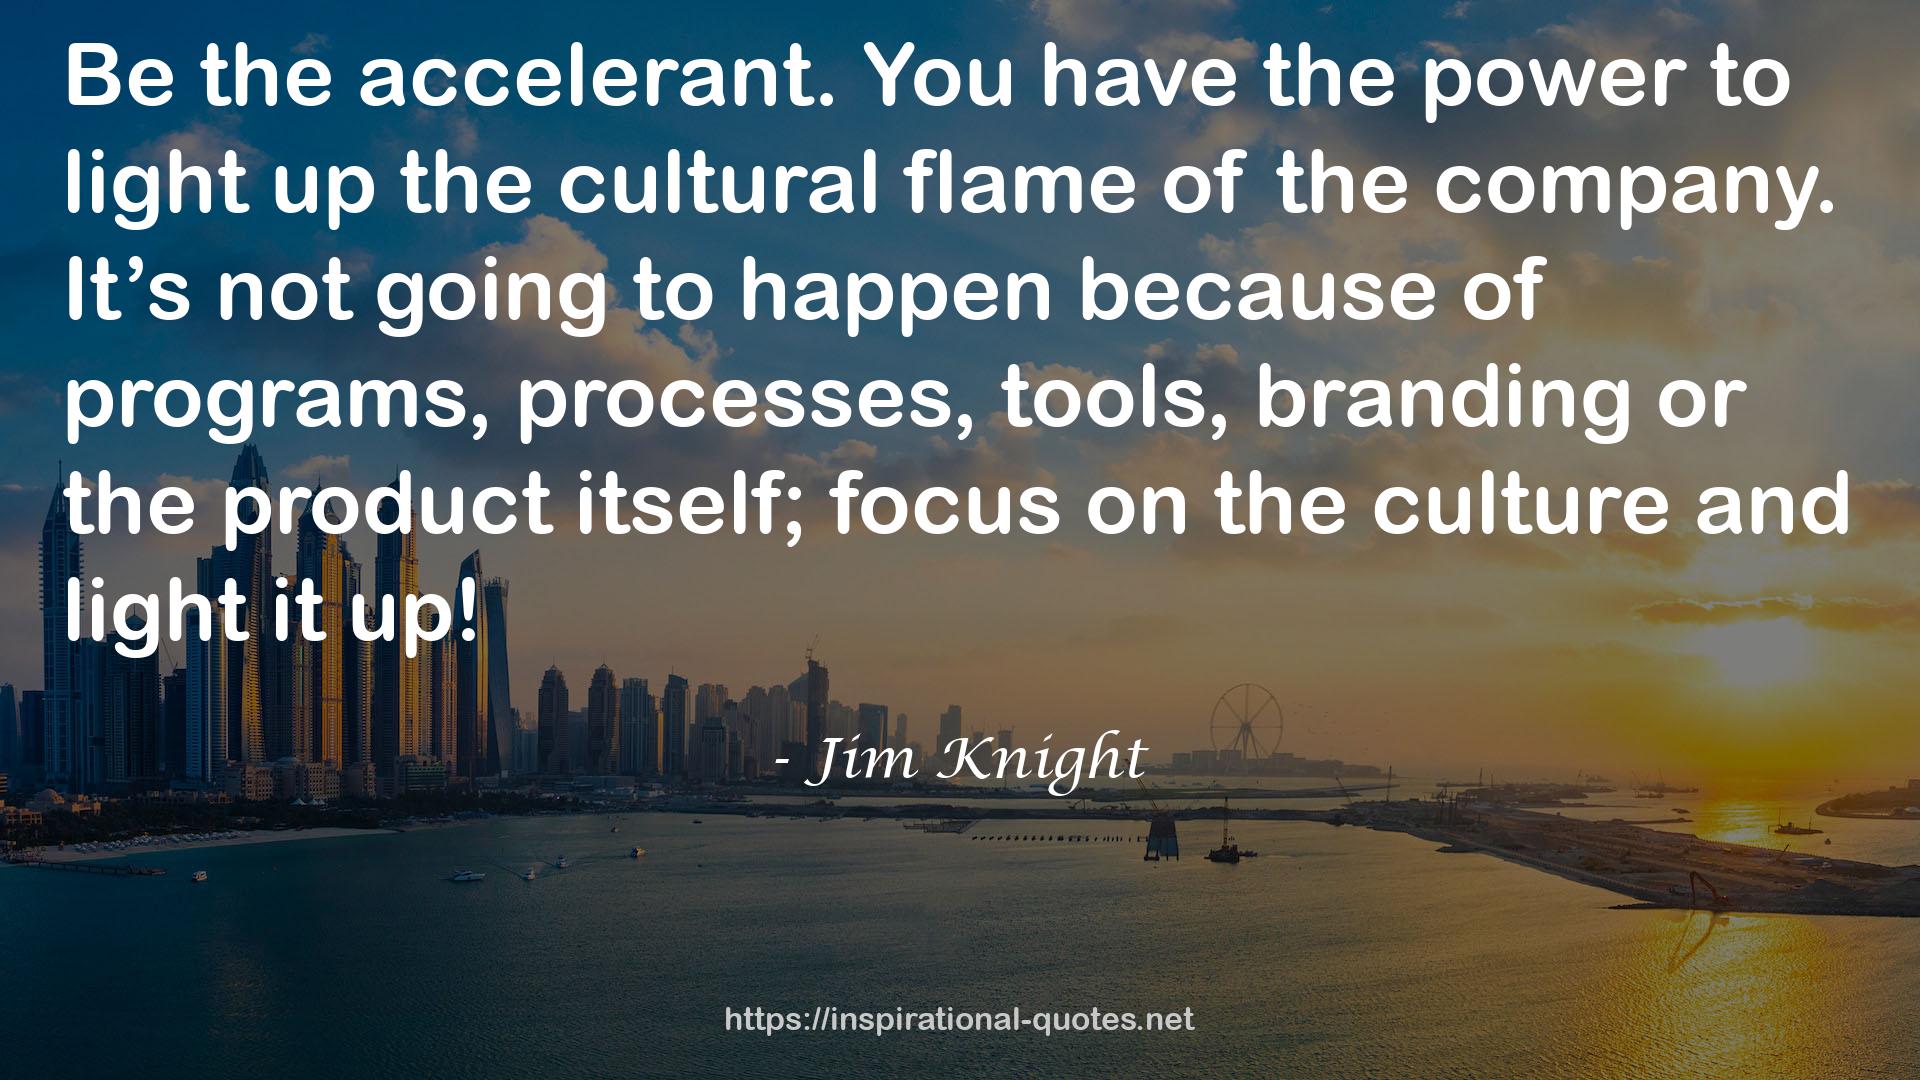 Jim Knight QUOTES